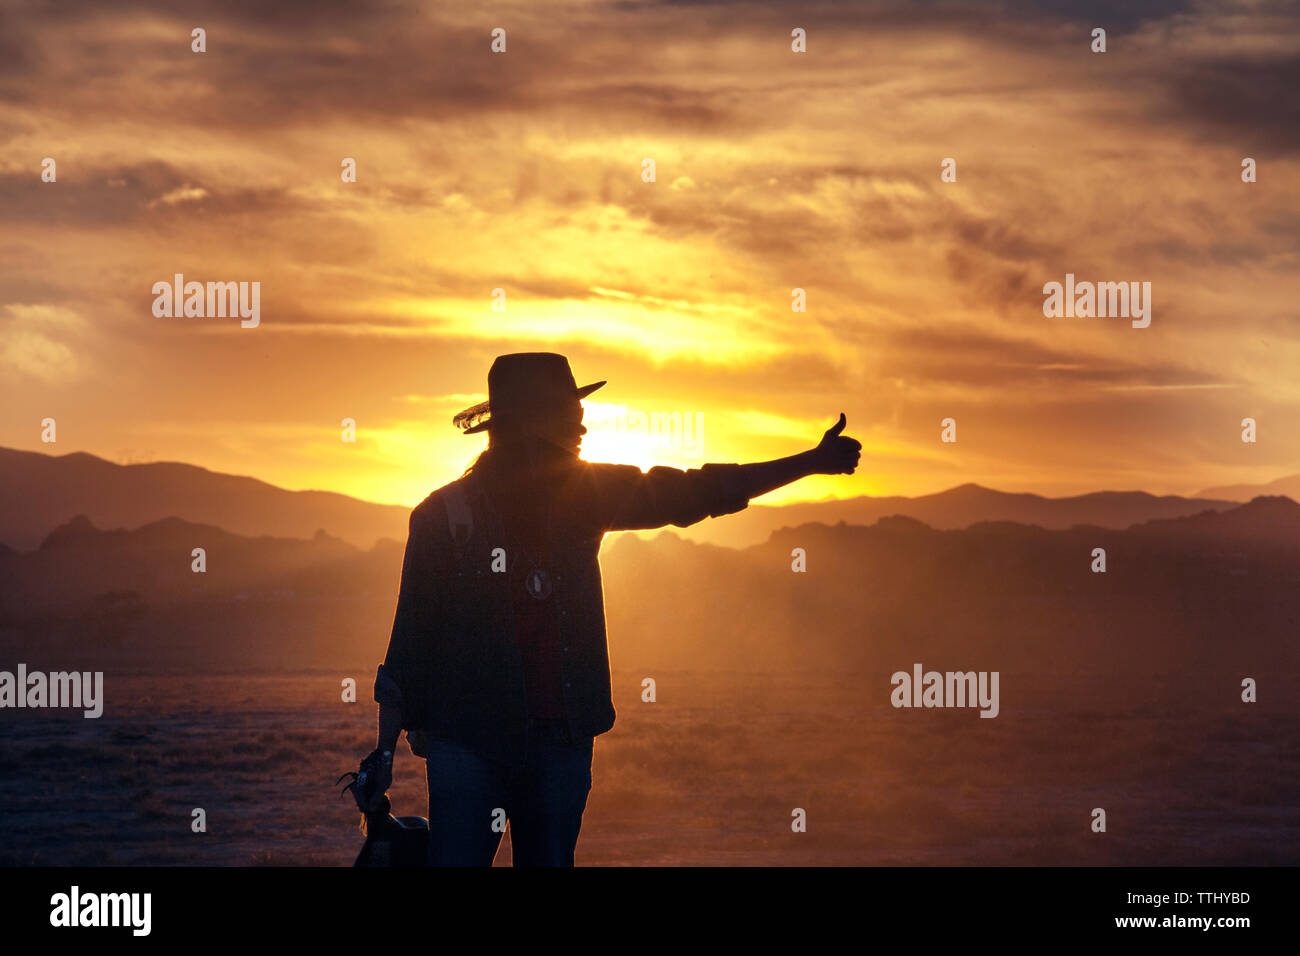 Silhouette of man showing thumb during sunset Stock Photo